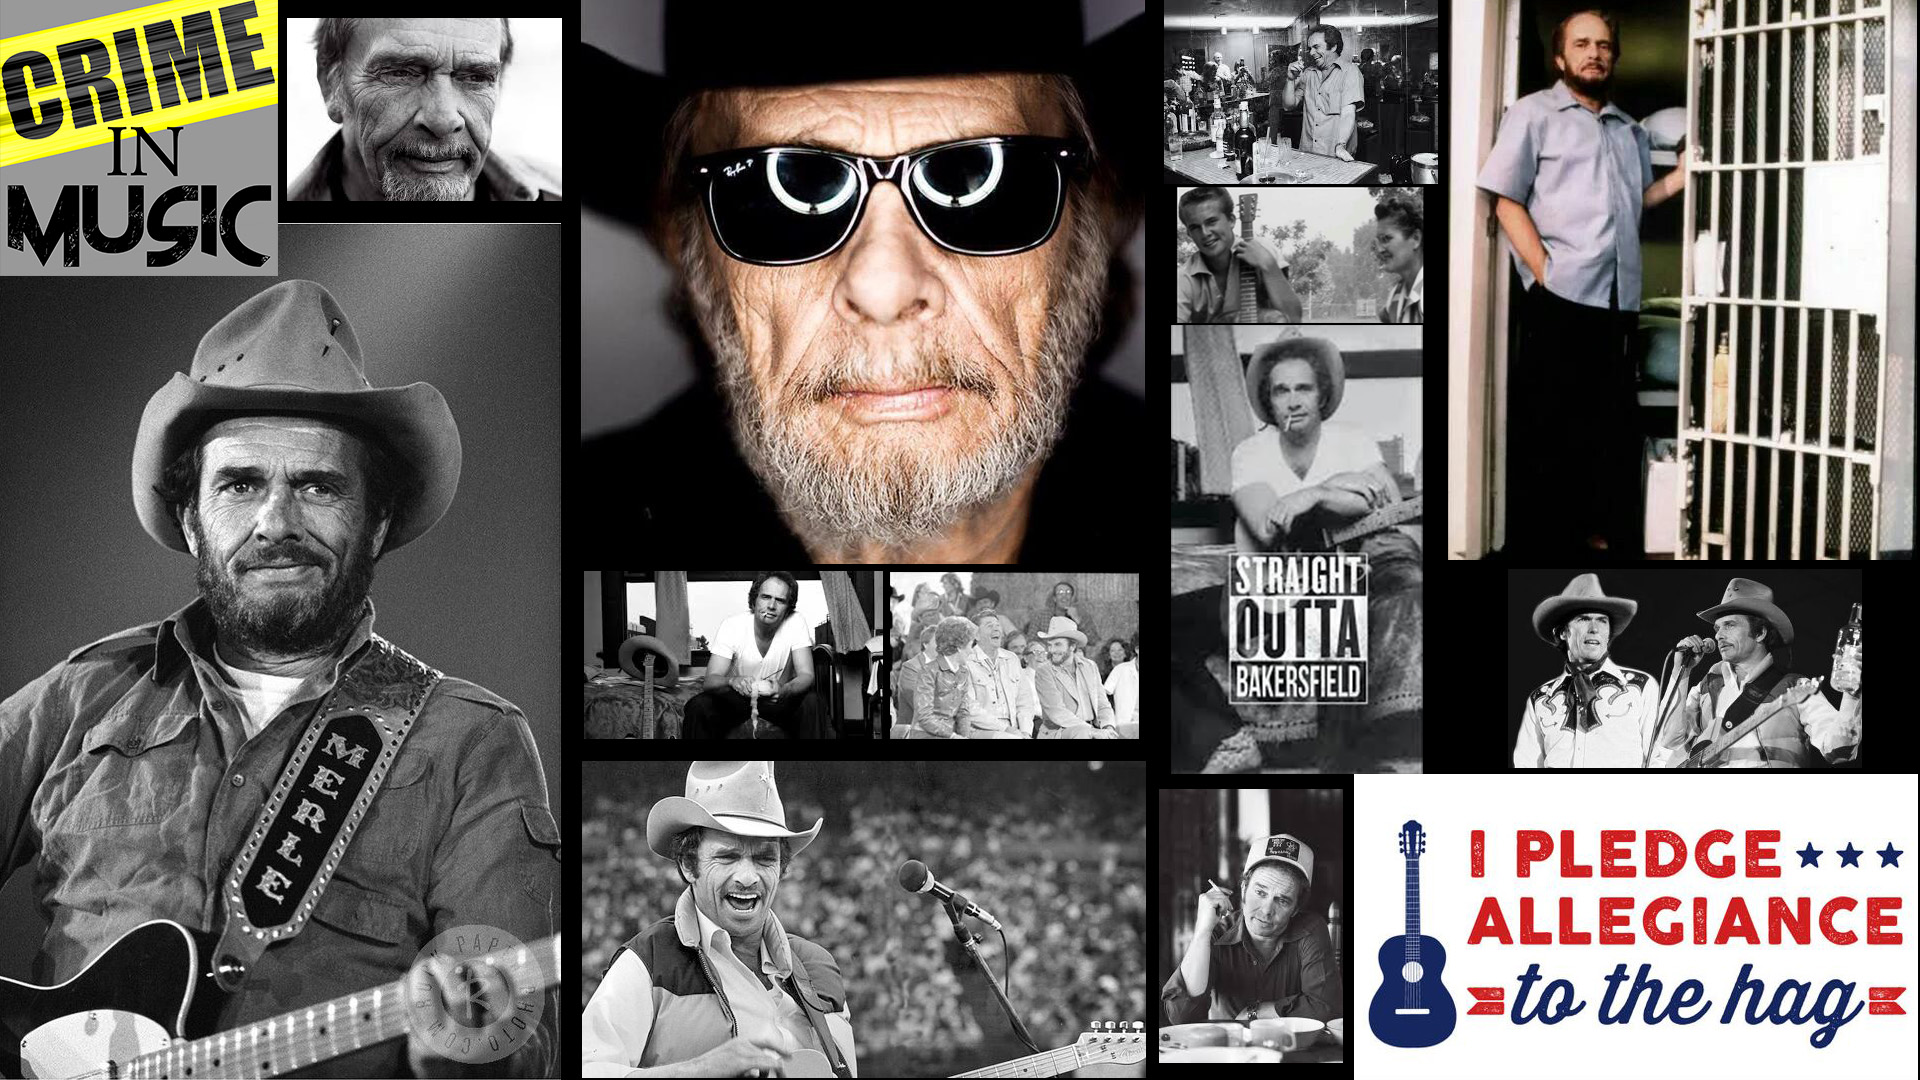 photo collage of Merle Haggard, Musician, counrty music outlaw